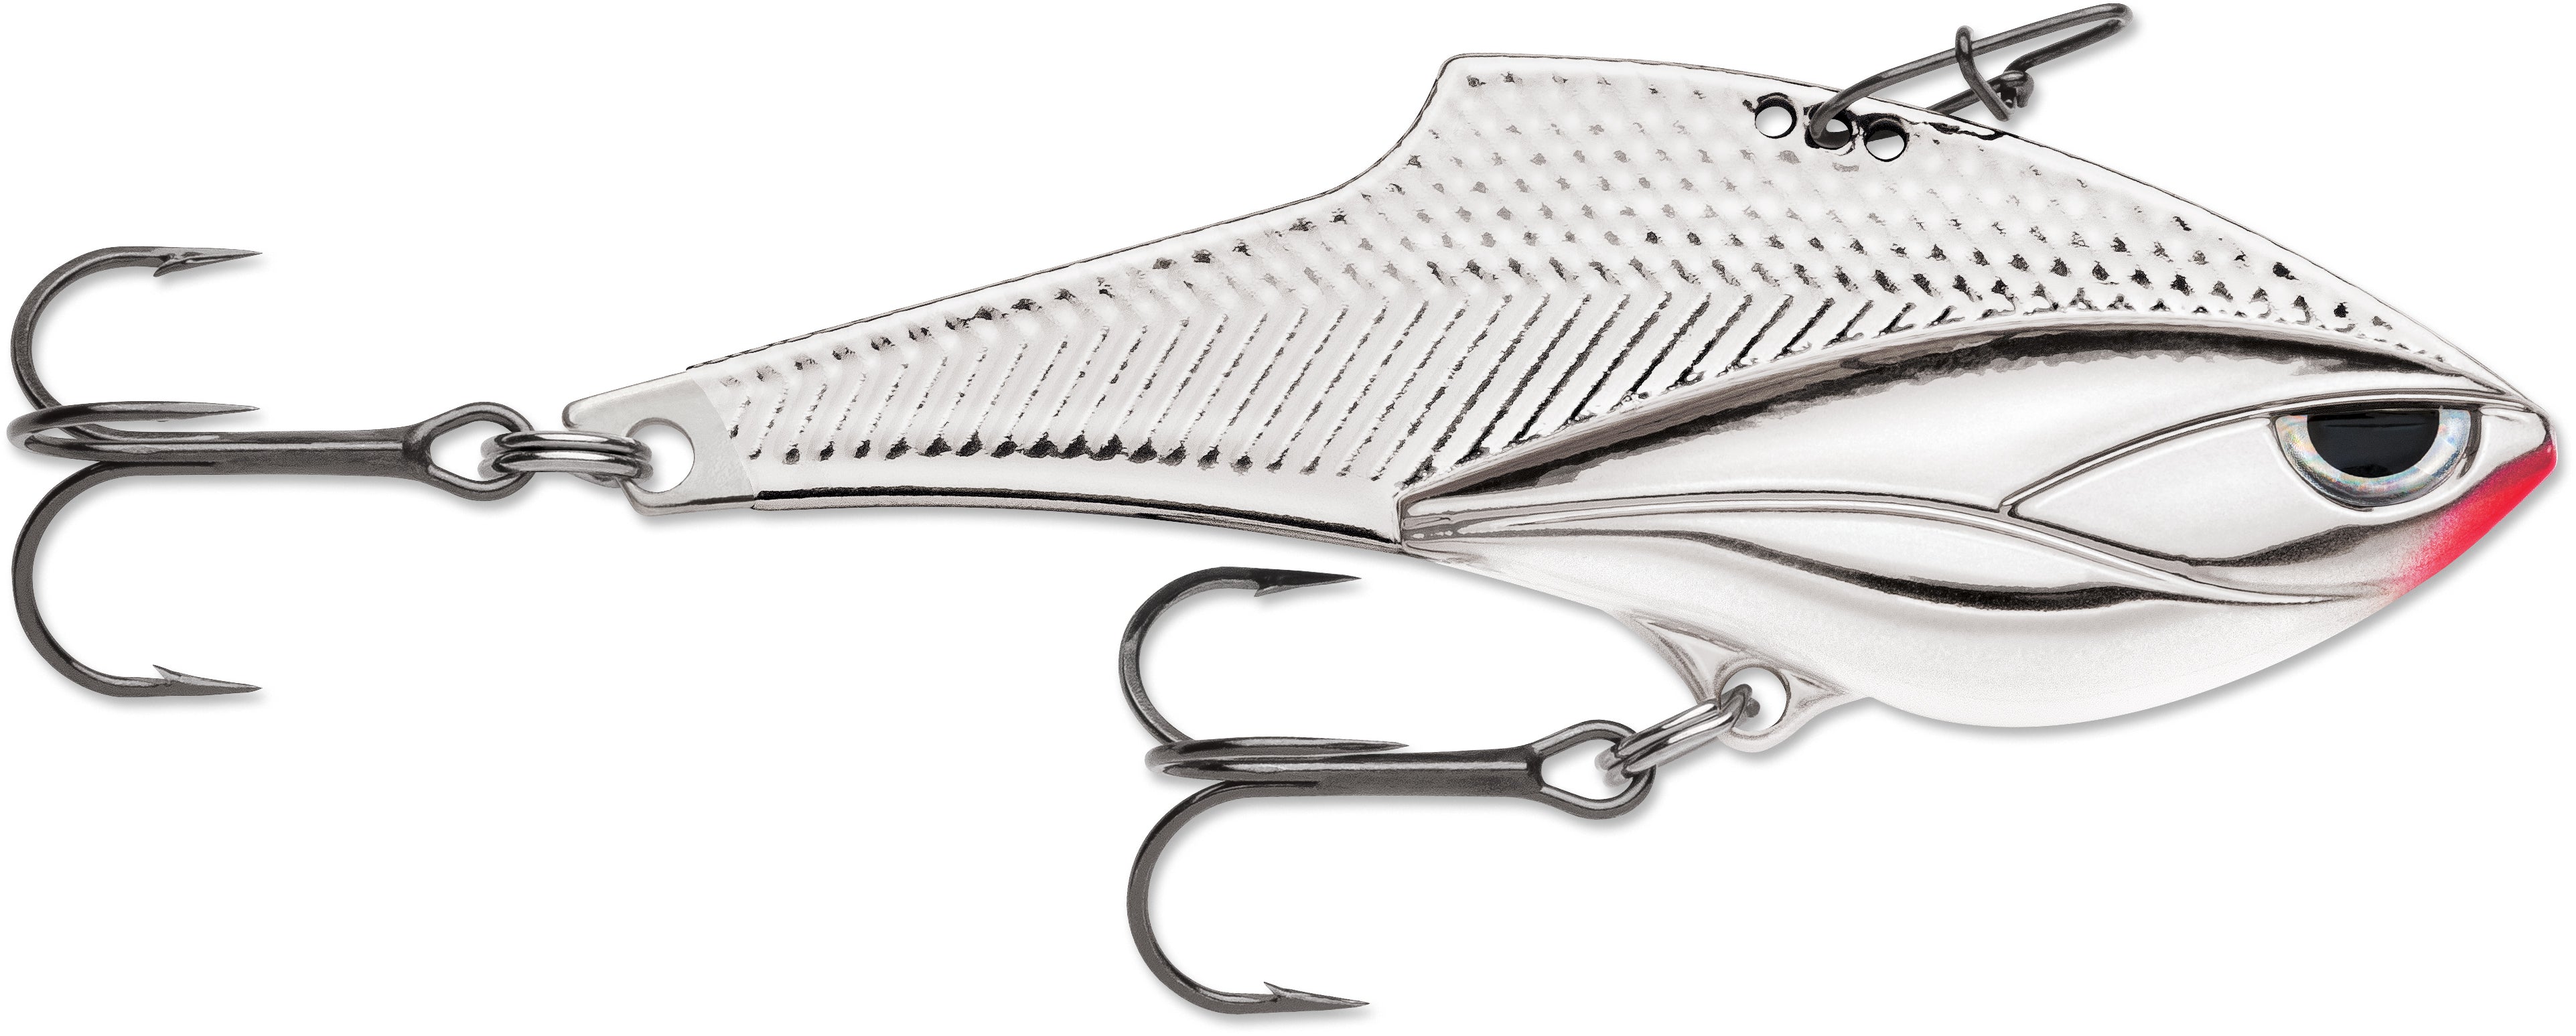 Rapala Rippin' Blade: Blade Bait - 2 3/4 Inch — Discount Tackle